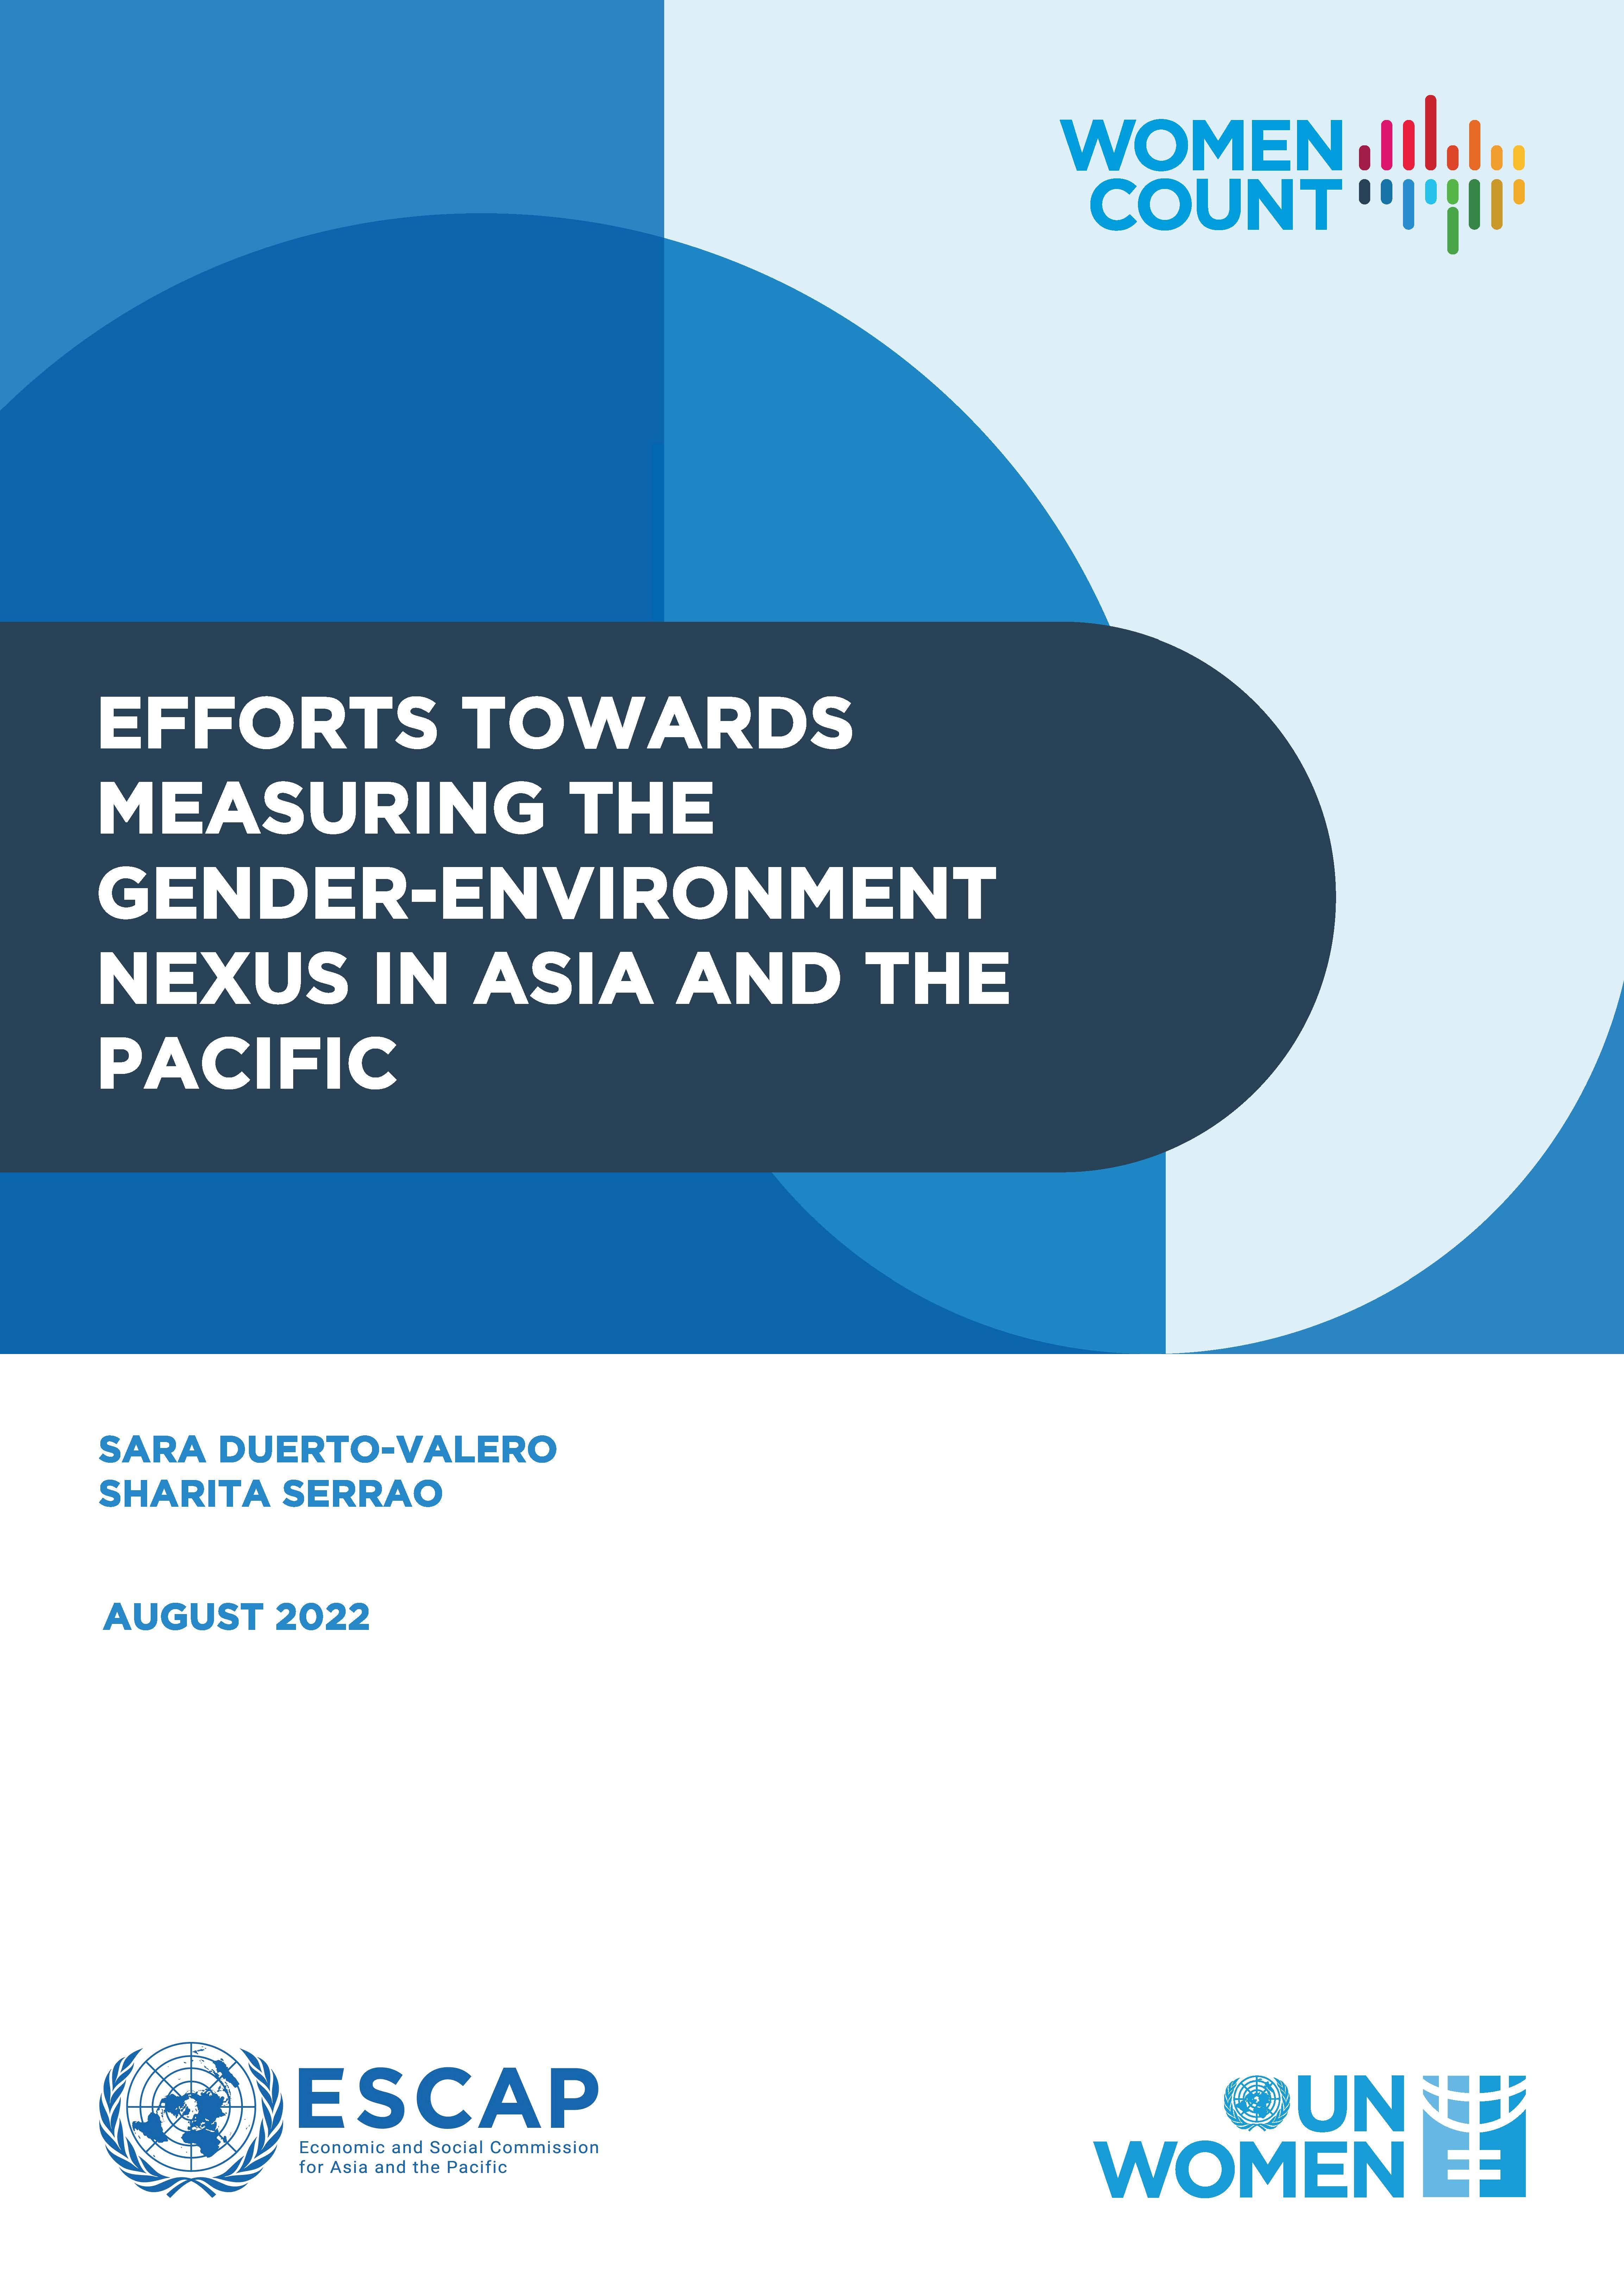 Efforts to measure the nexus between gender and the environment